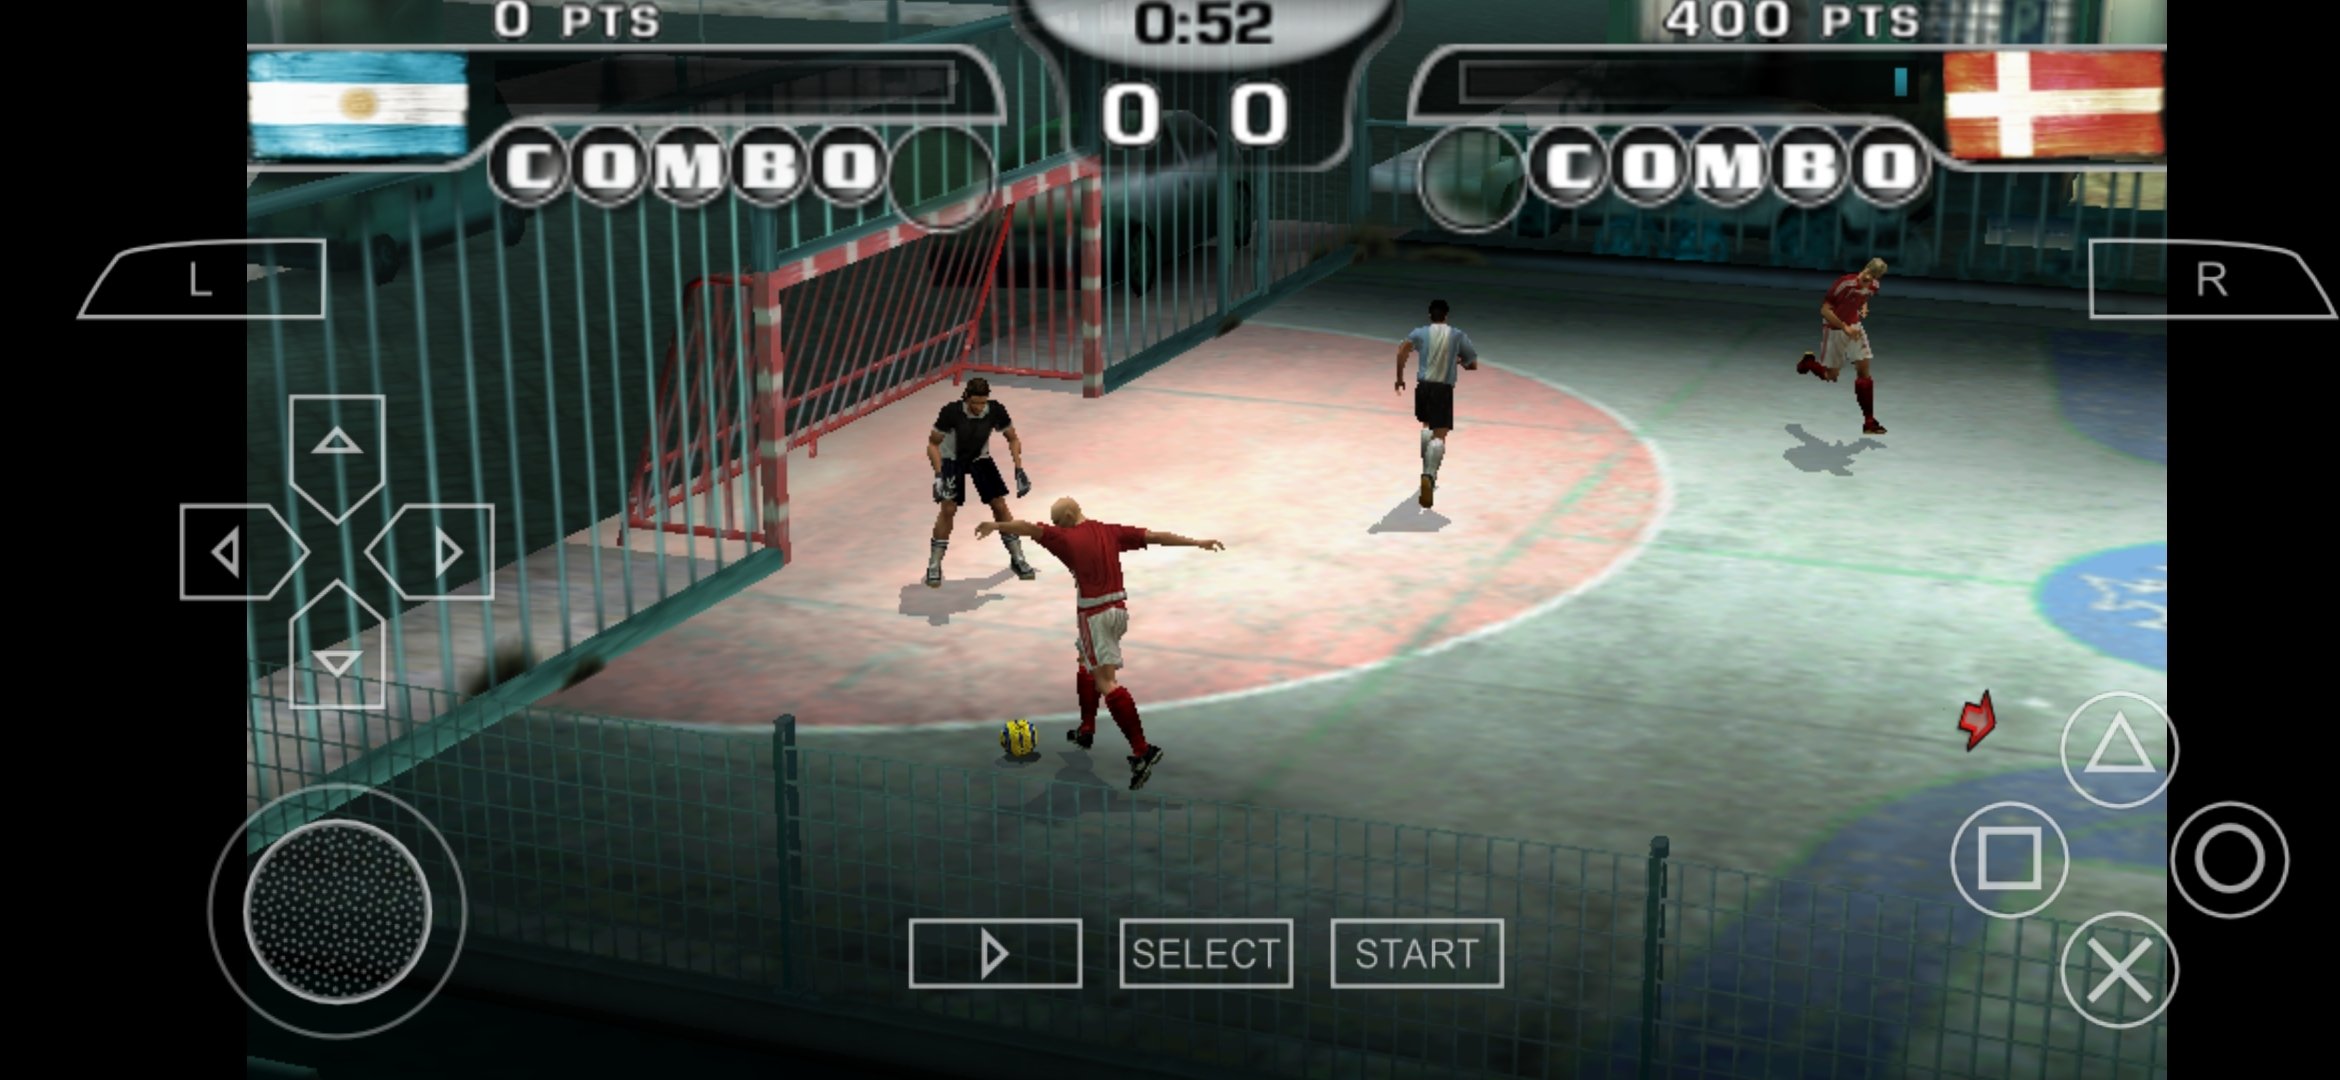 Download FIFA 2018 APK Mod + ISO For PPSSPP Emulator On Android